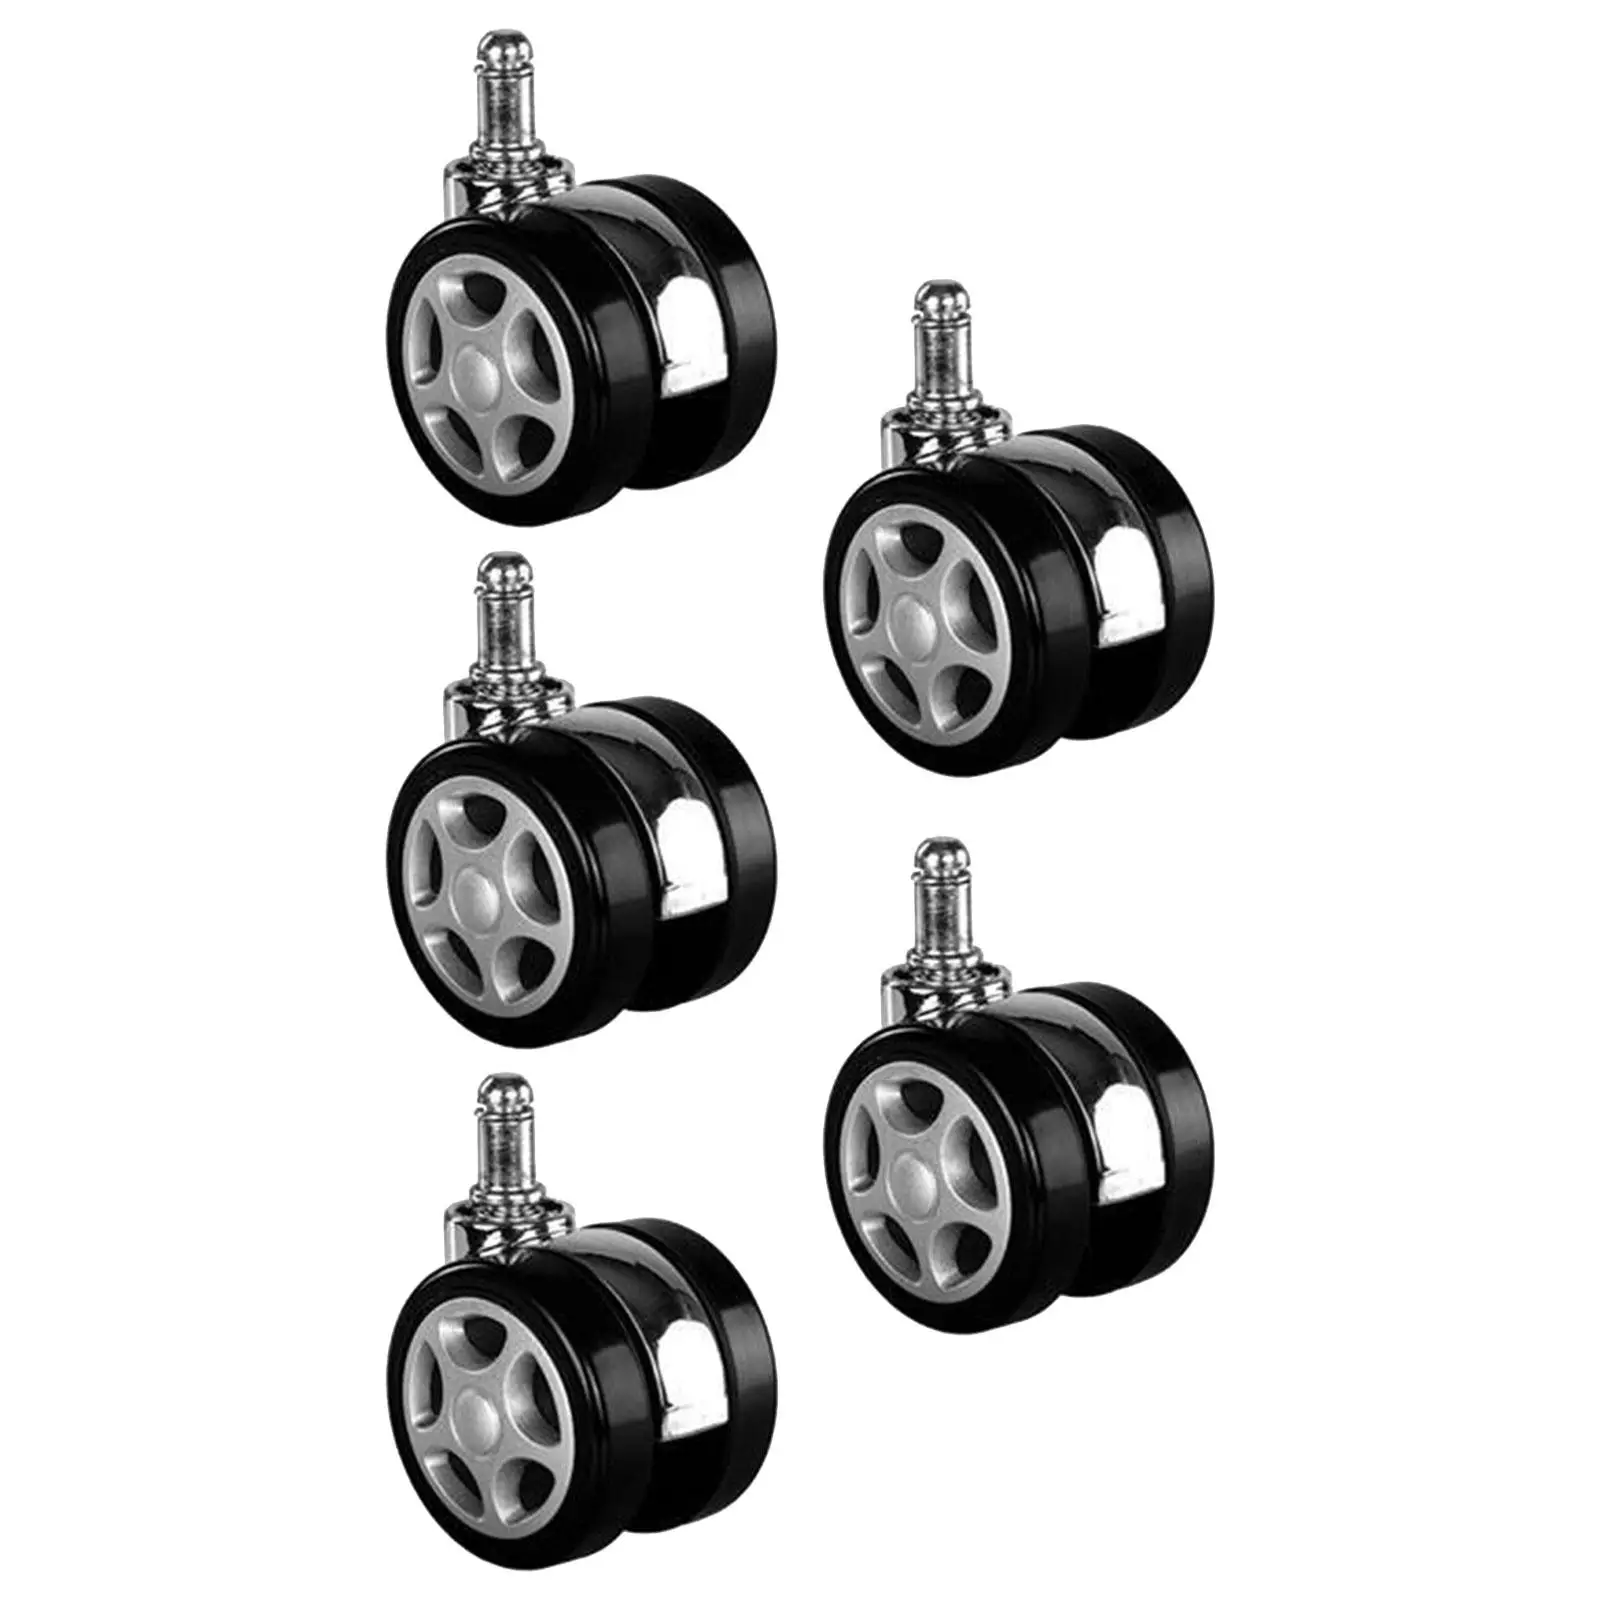 5x Office Chair Wheels Noise Free Universal Wear Resistant Accessories Smooth Gliding Mute 2 inch for Carpet Hardwood Floor